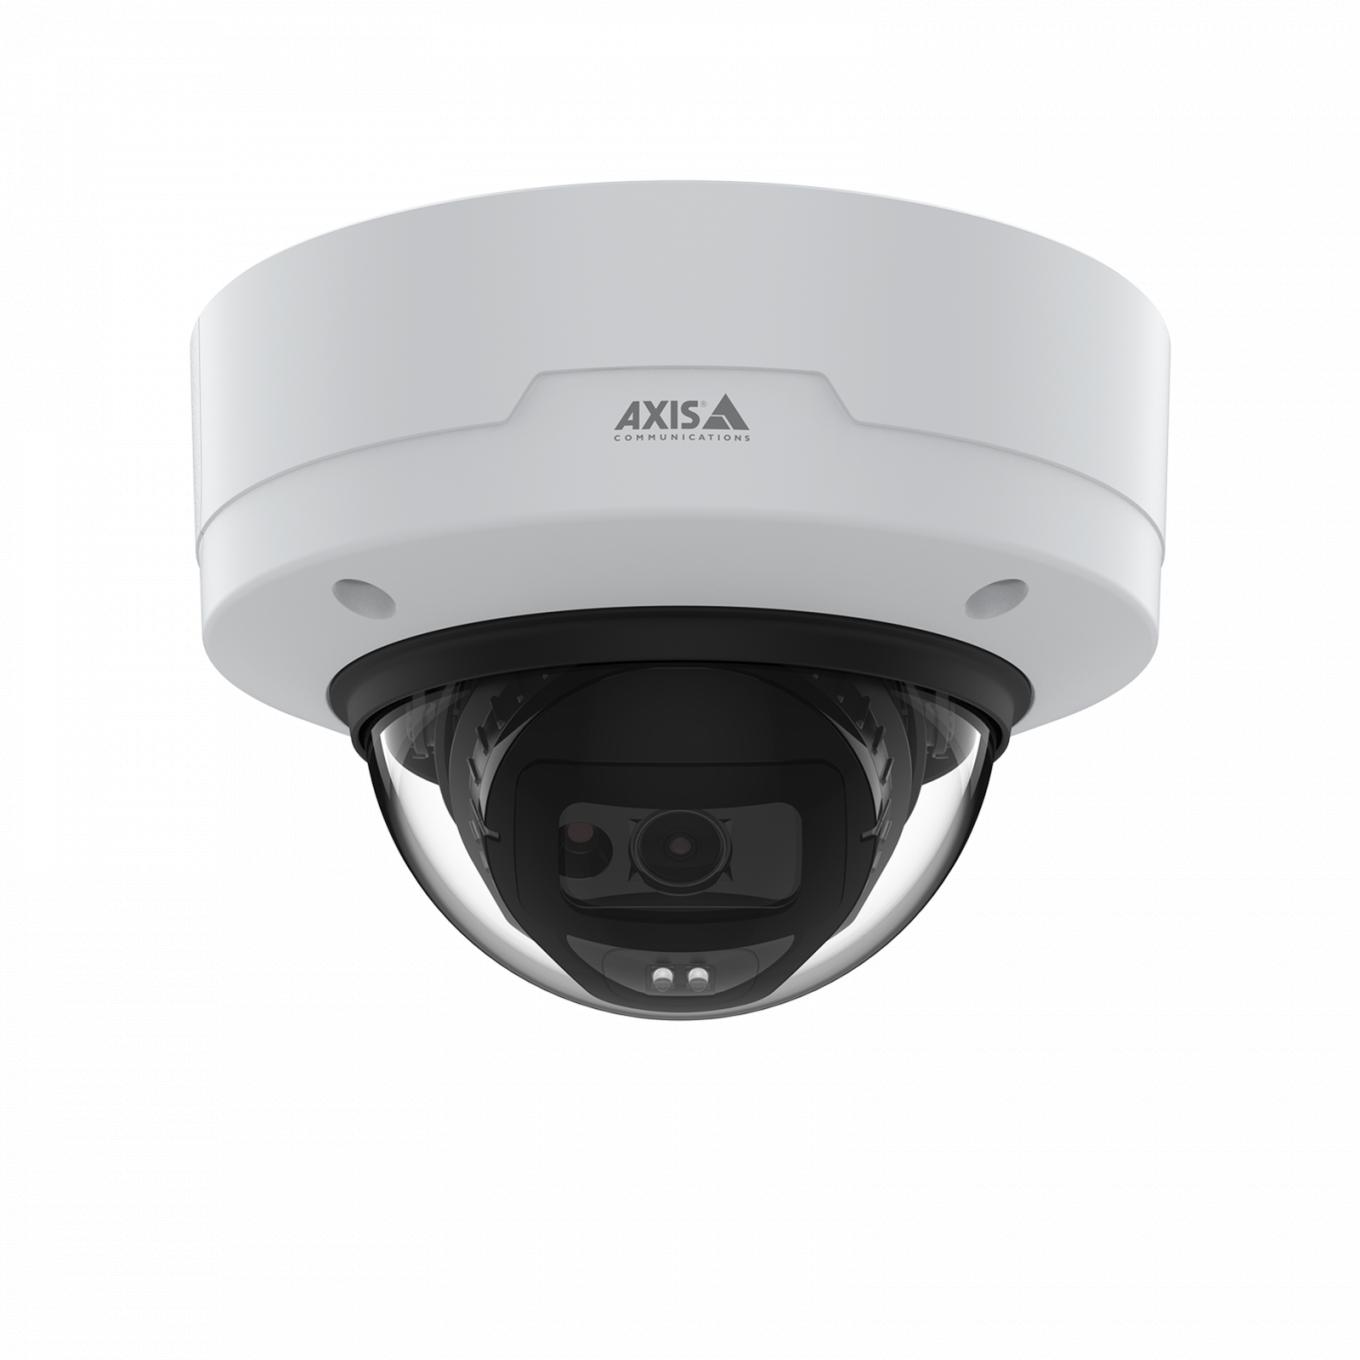 AXIS M3216-LVE Dome Camera | Axis Communications